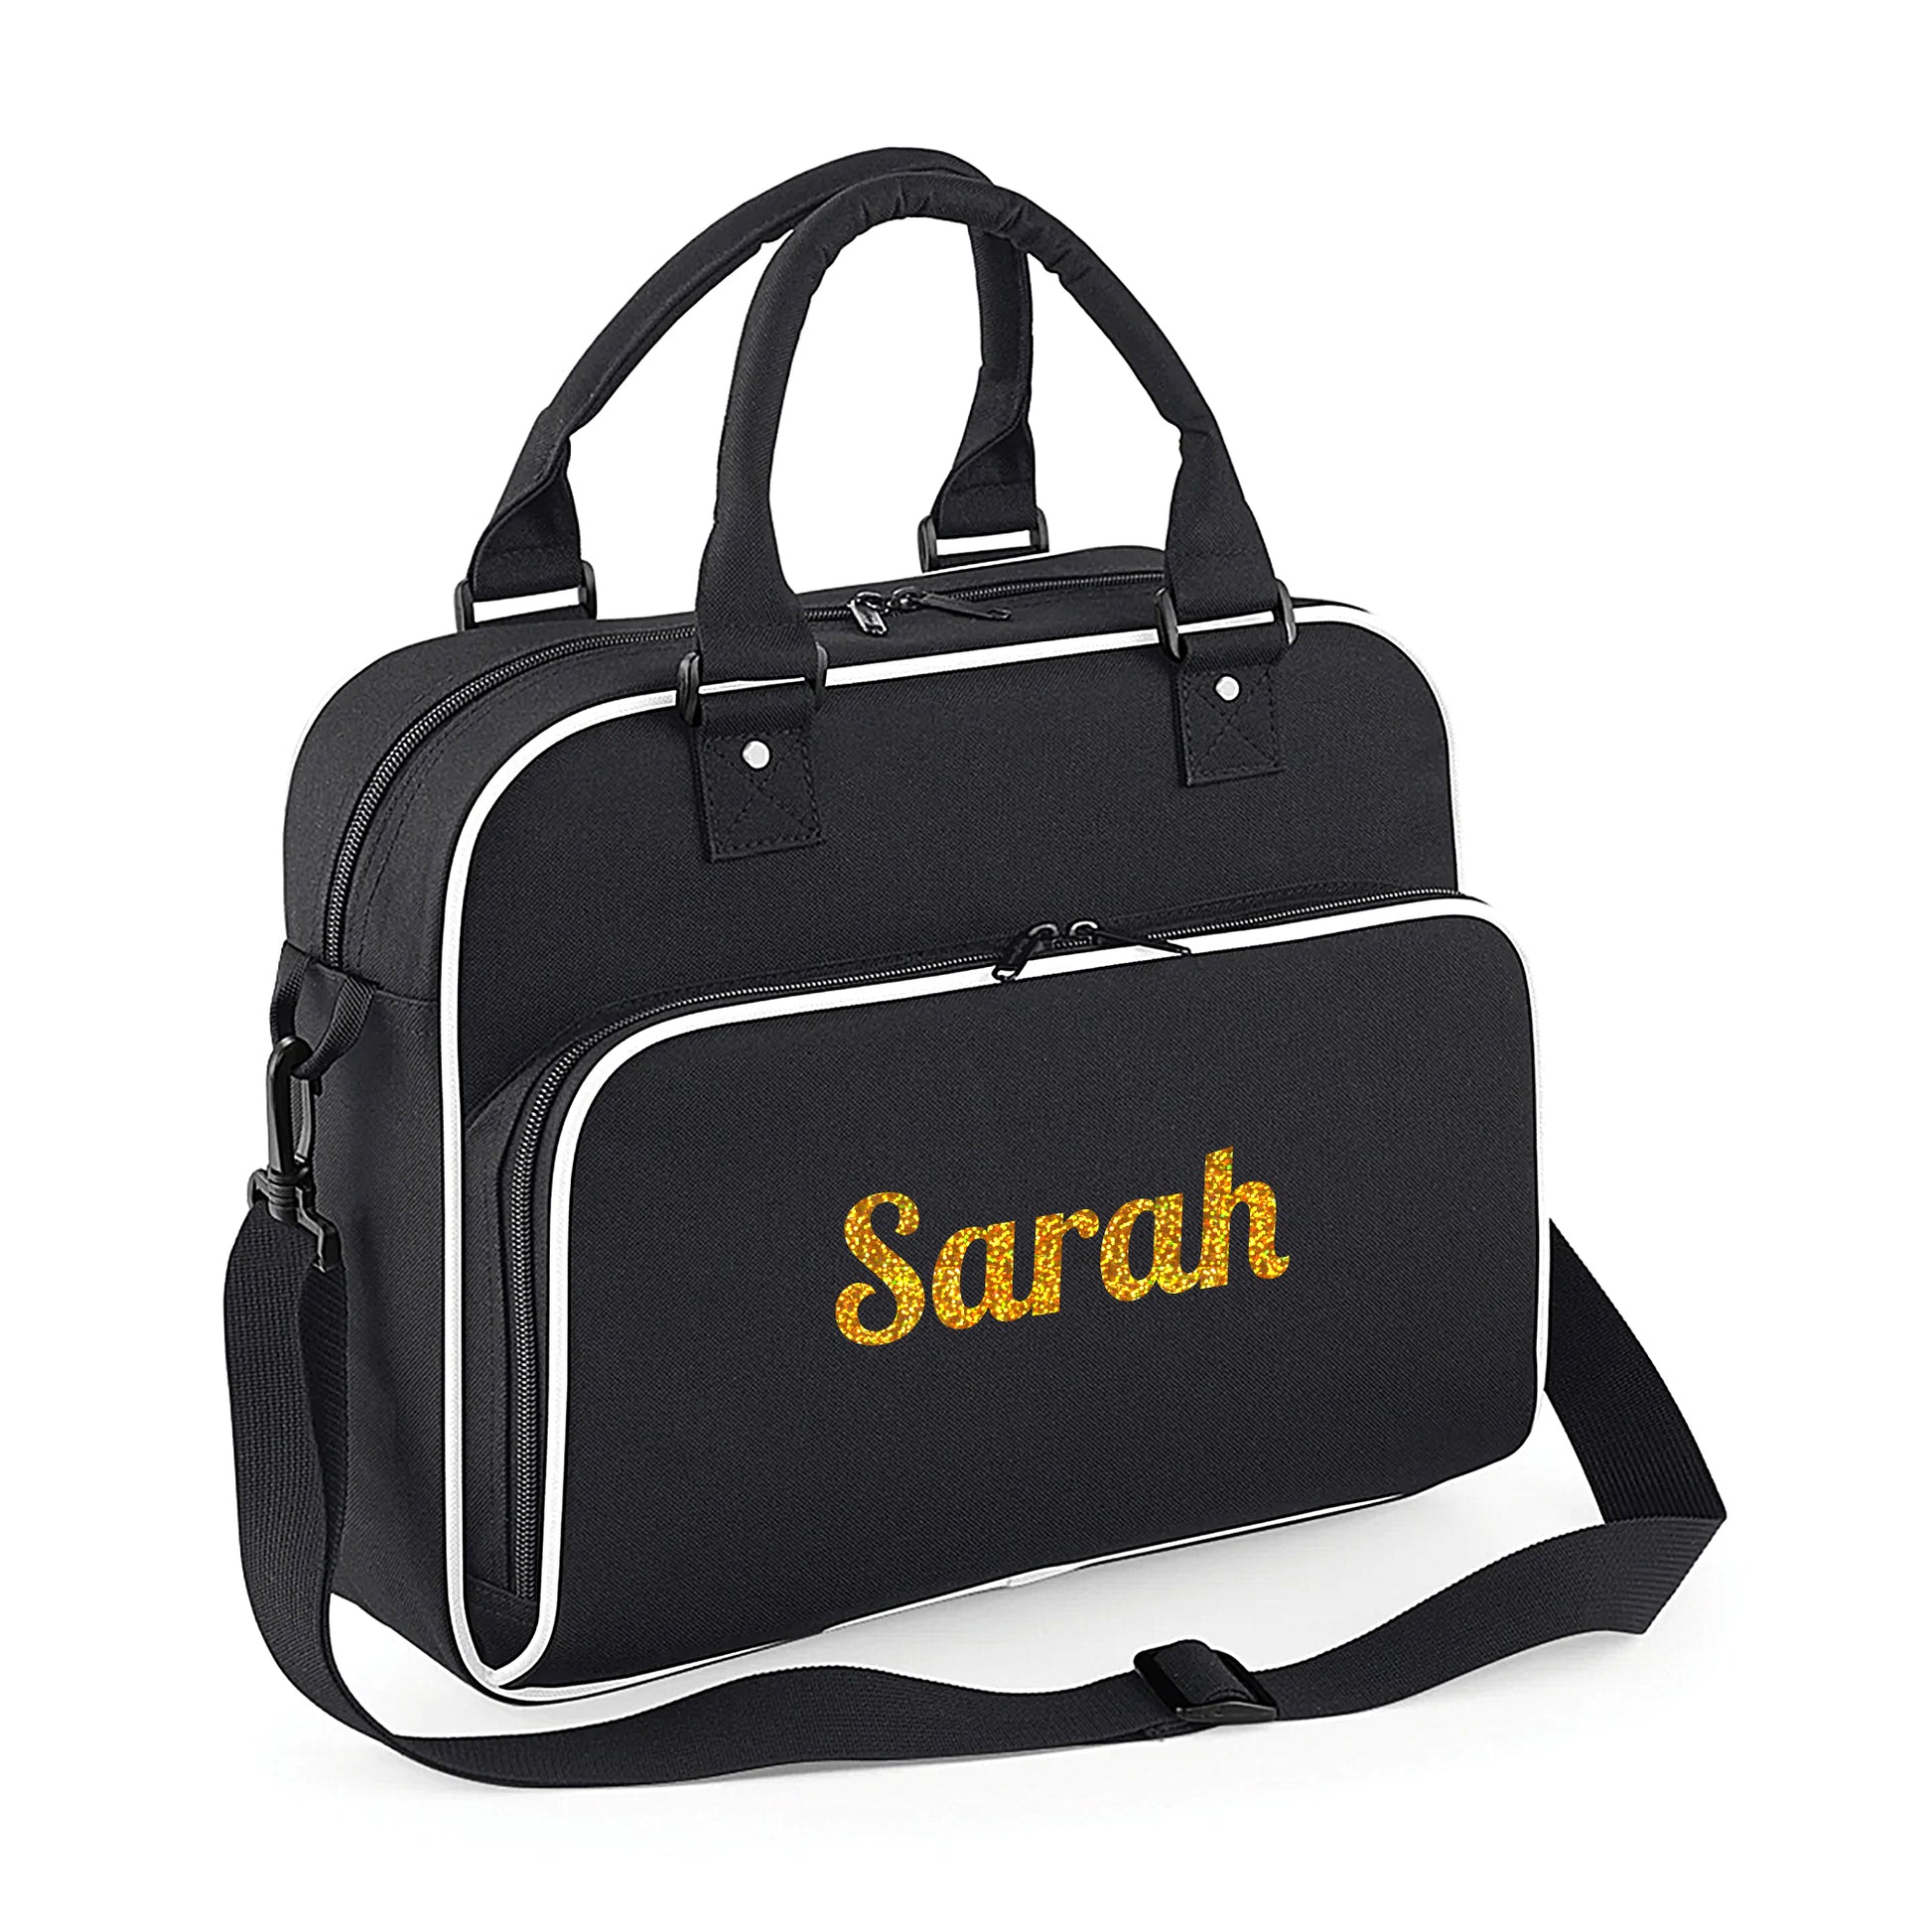 Personalised Girls Sports Bag with Name Dancing Swimming Gymnastic School Gym Bag  - Always Looking Good - Black with White Piping Name Only 